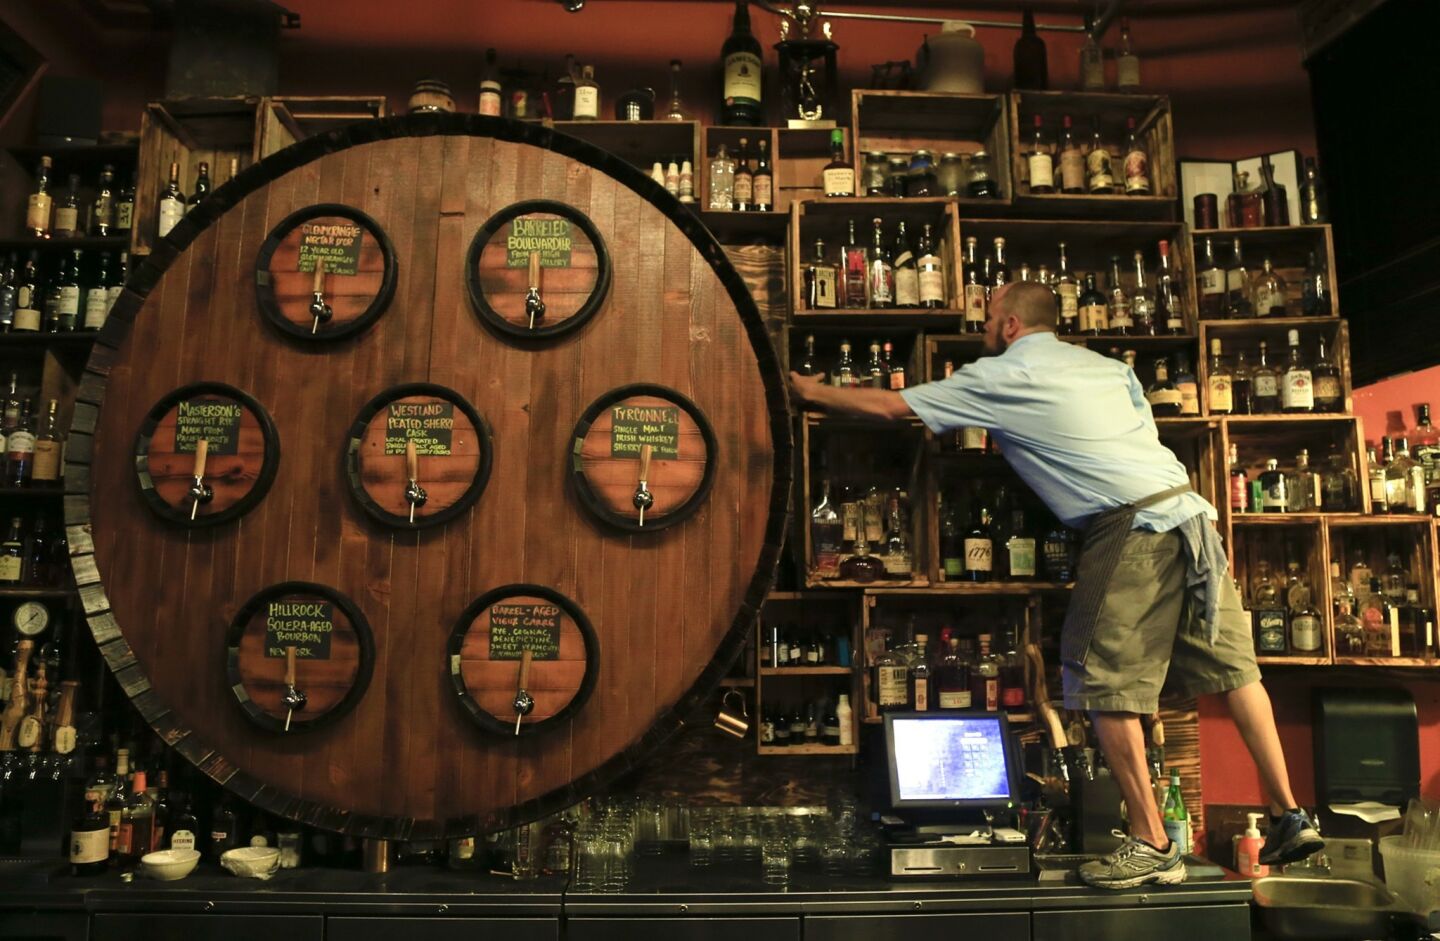 The gigantic barrel facade behind the bar houses the taps dispensing whiskey, cognac and other hard liquor at Radiator Whiskey, where the sips can be paired with comfort food.